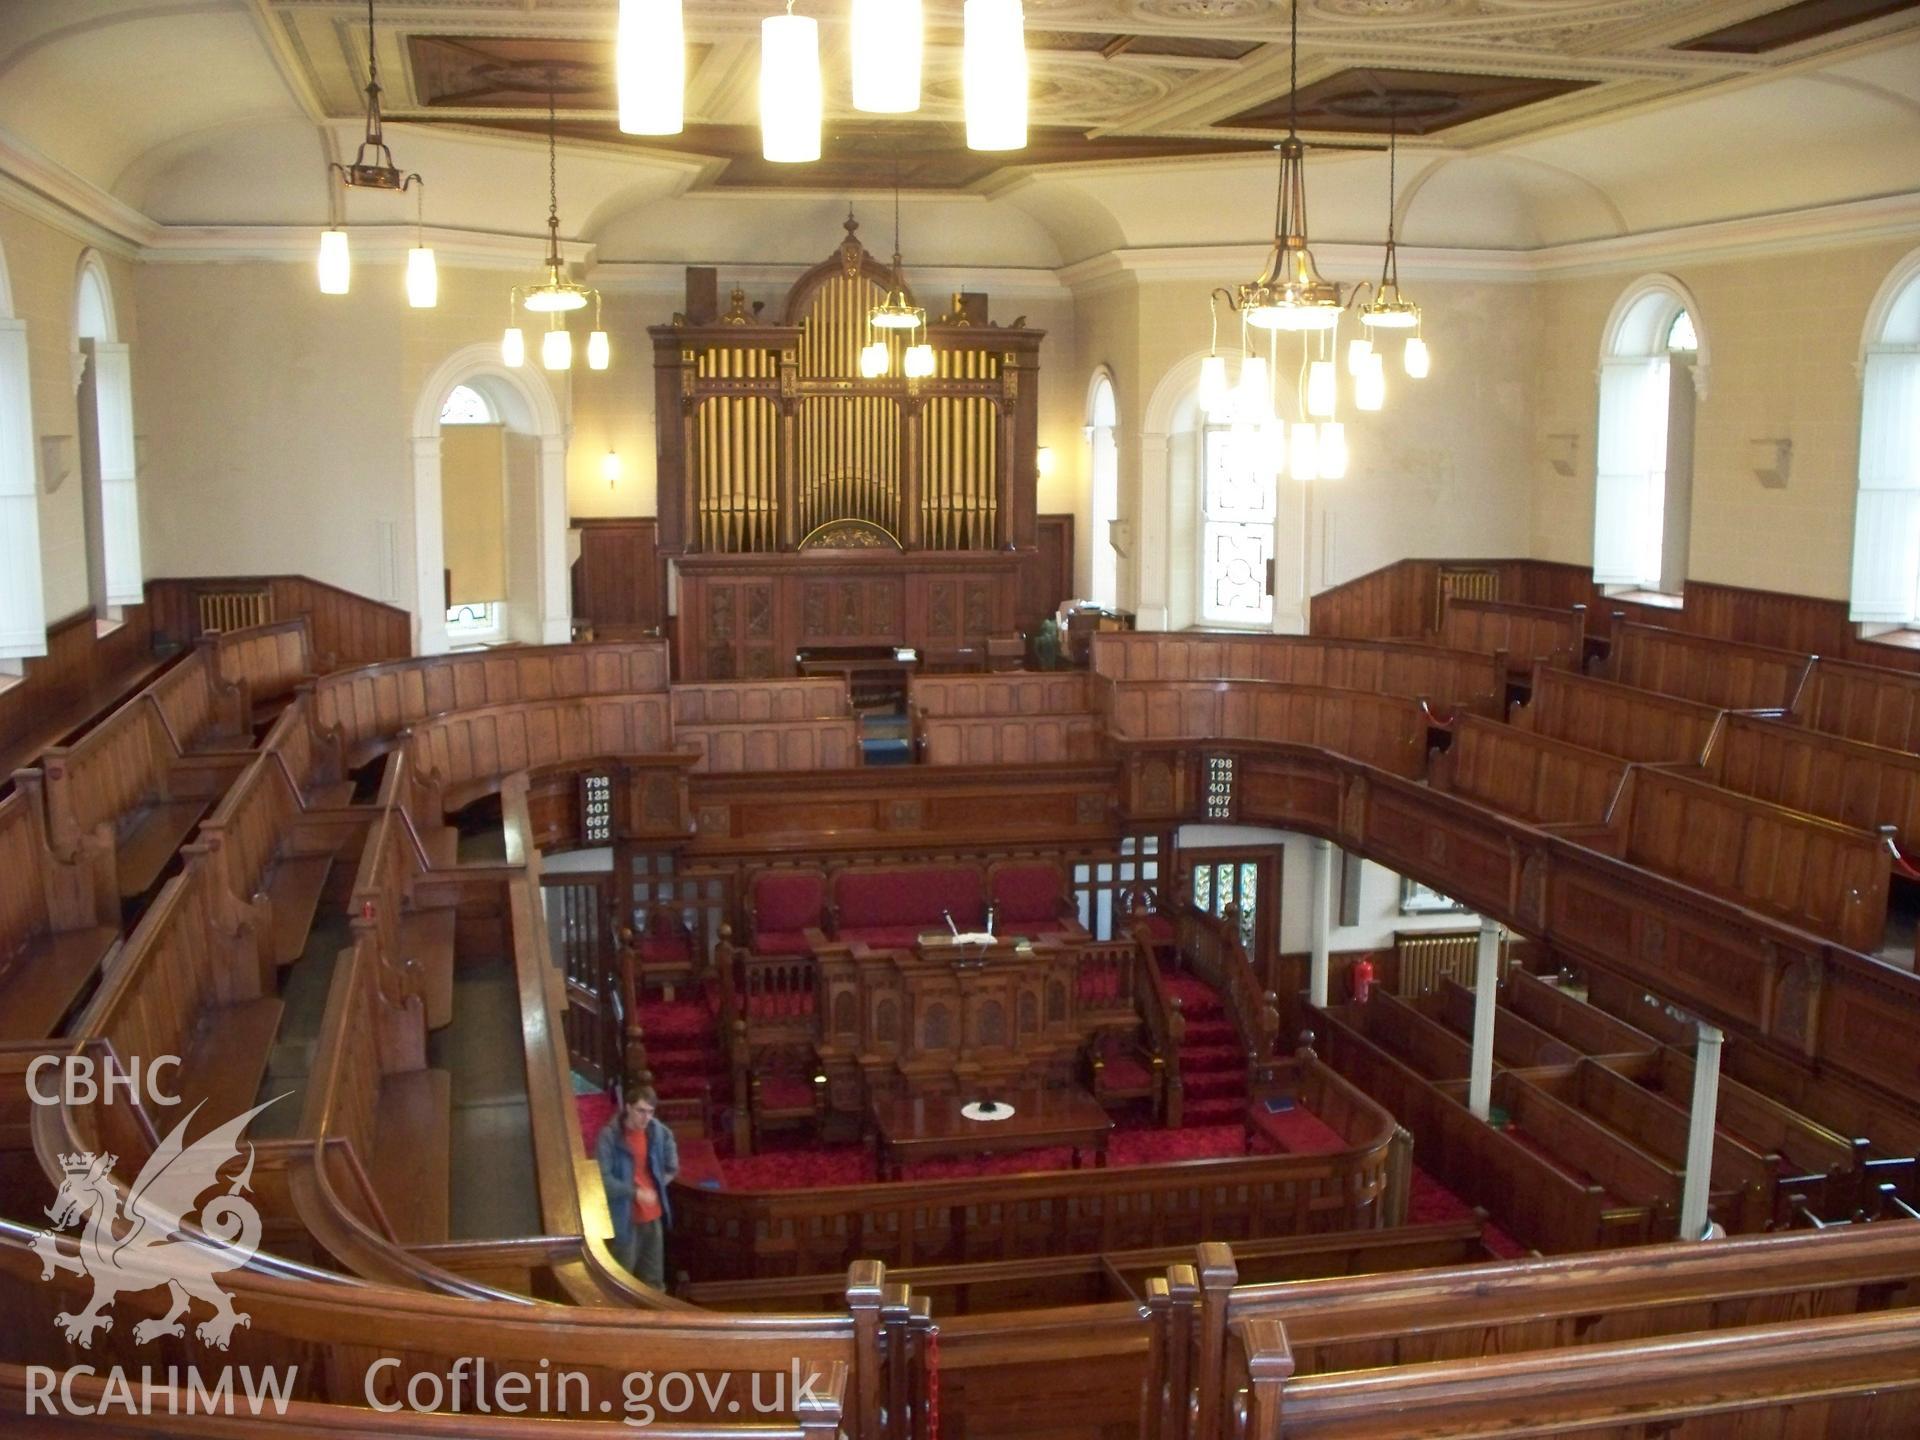 Ceiling, organ & pulpit from rear gallery.